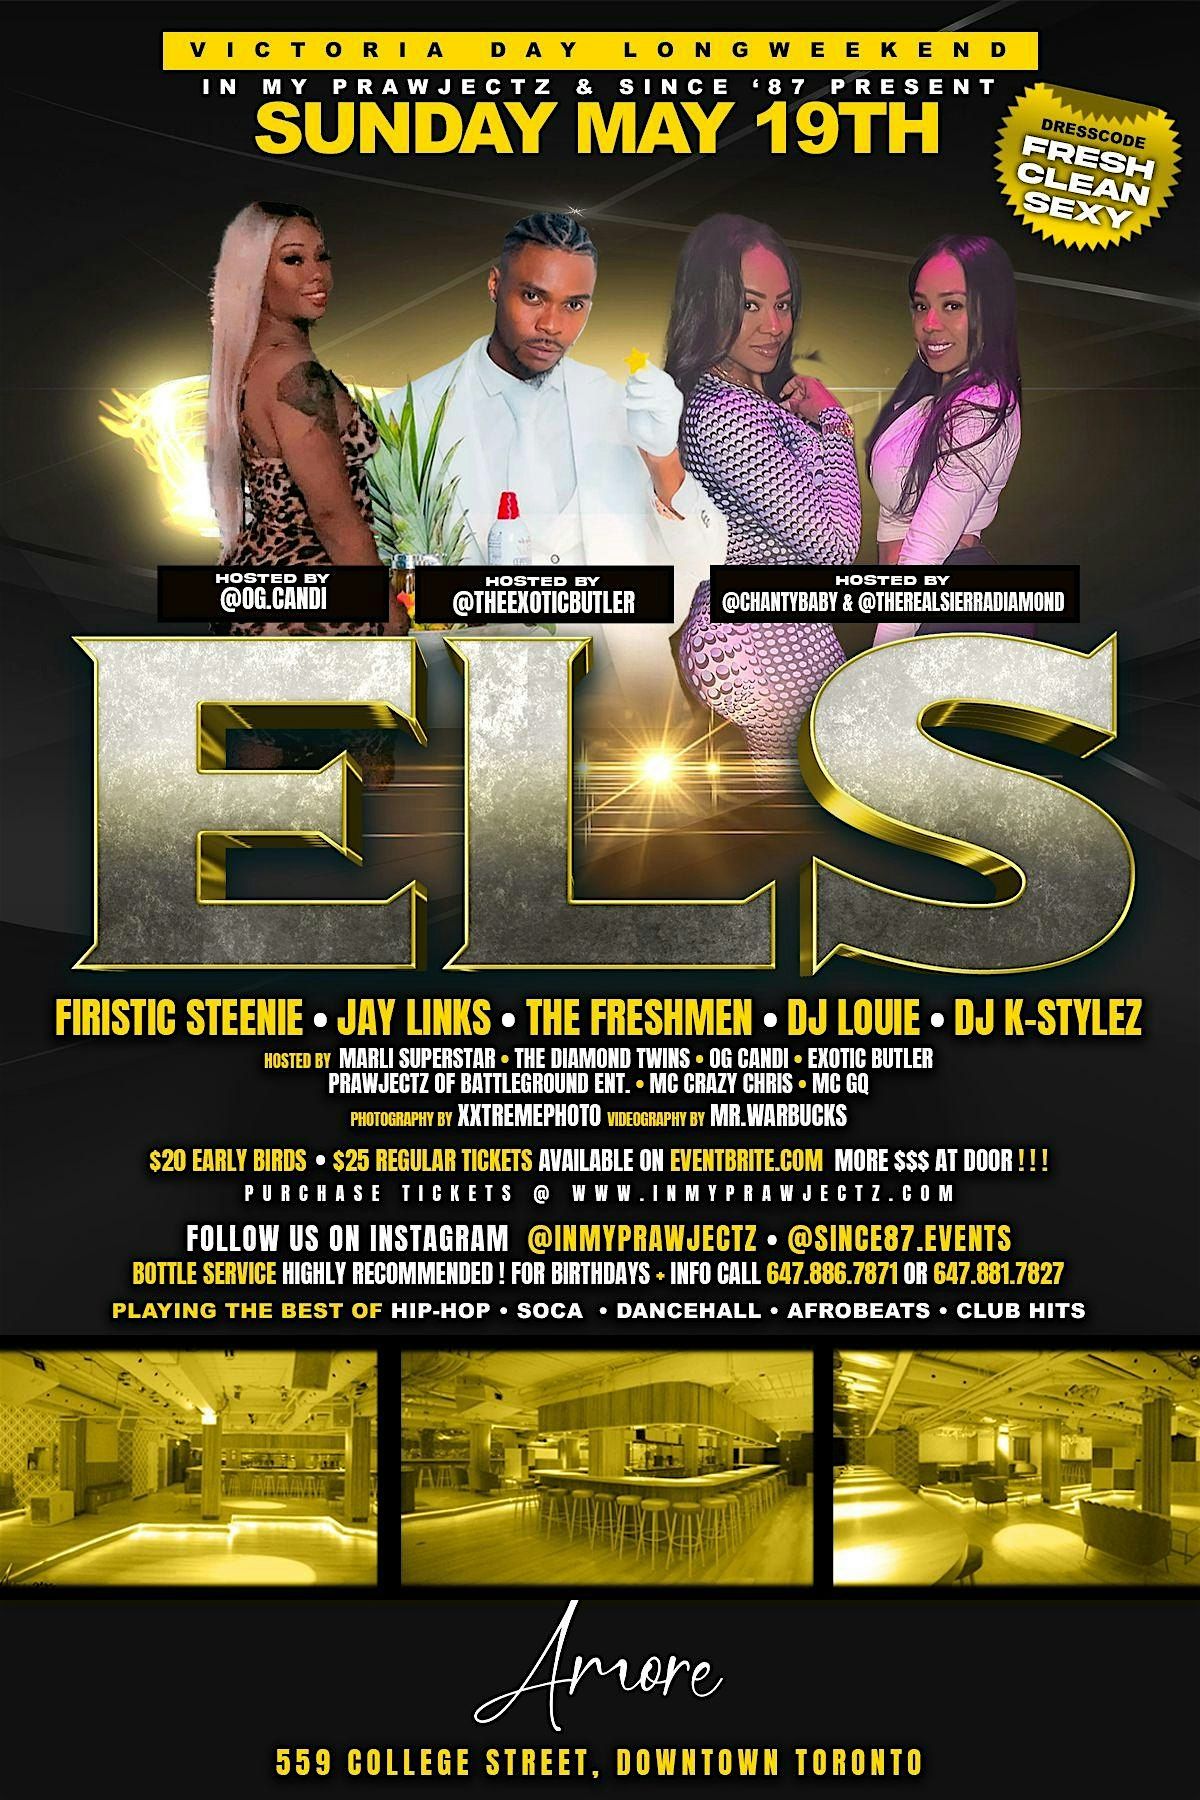 ELS - EVERY LONGWEEKEND SUNDAY ! GOIN DOWN VICTORIA LONG WEEKEND "SUN,MAY.19TH @ AMORE NIGHTS !!!!!!